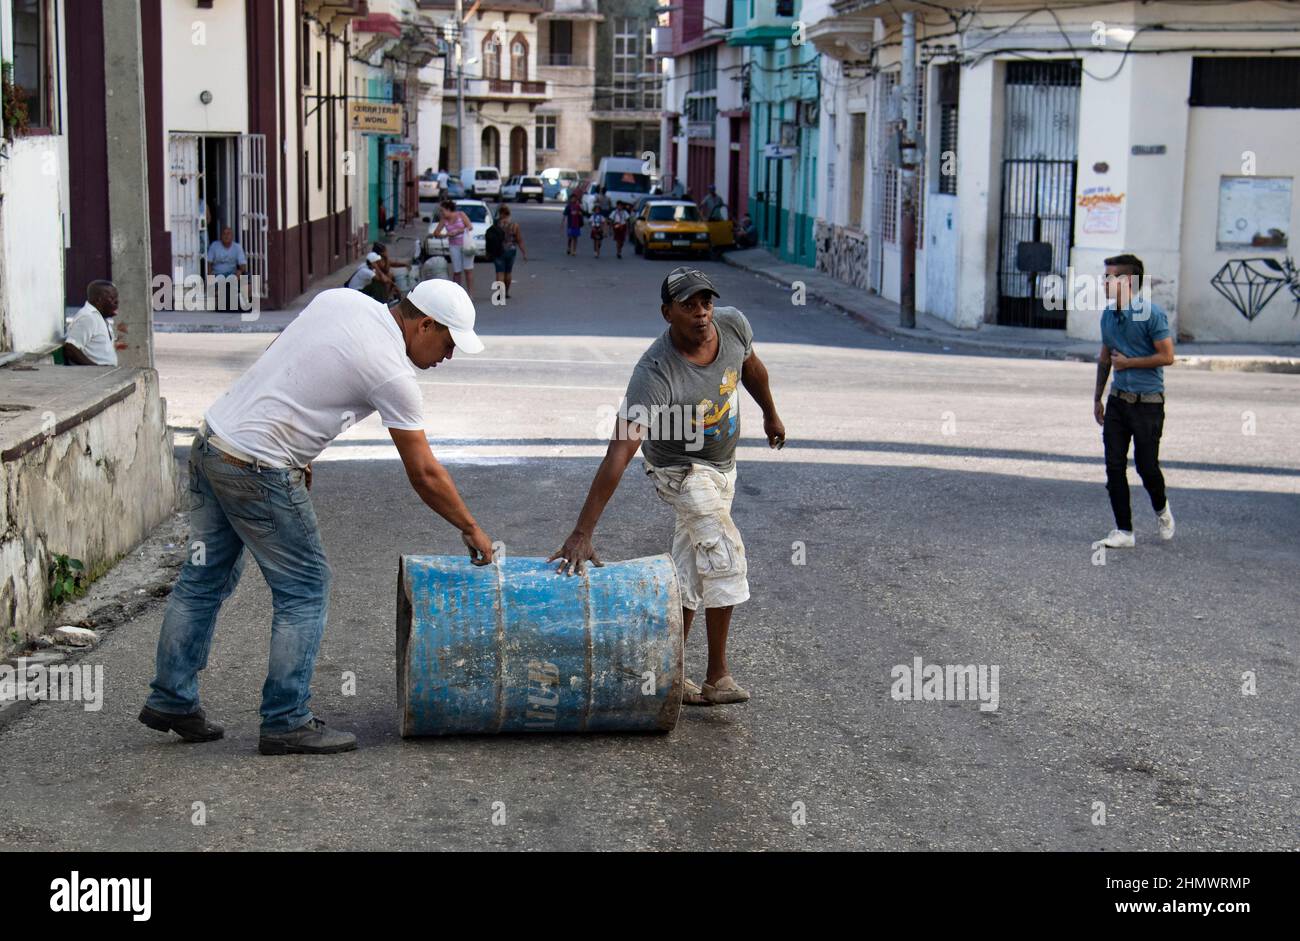 Two men working, one wearing a Simpsons cartoon t'shirt, push a heavy can through the streets of Havana, Cuba. Stock Photo